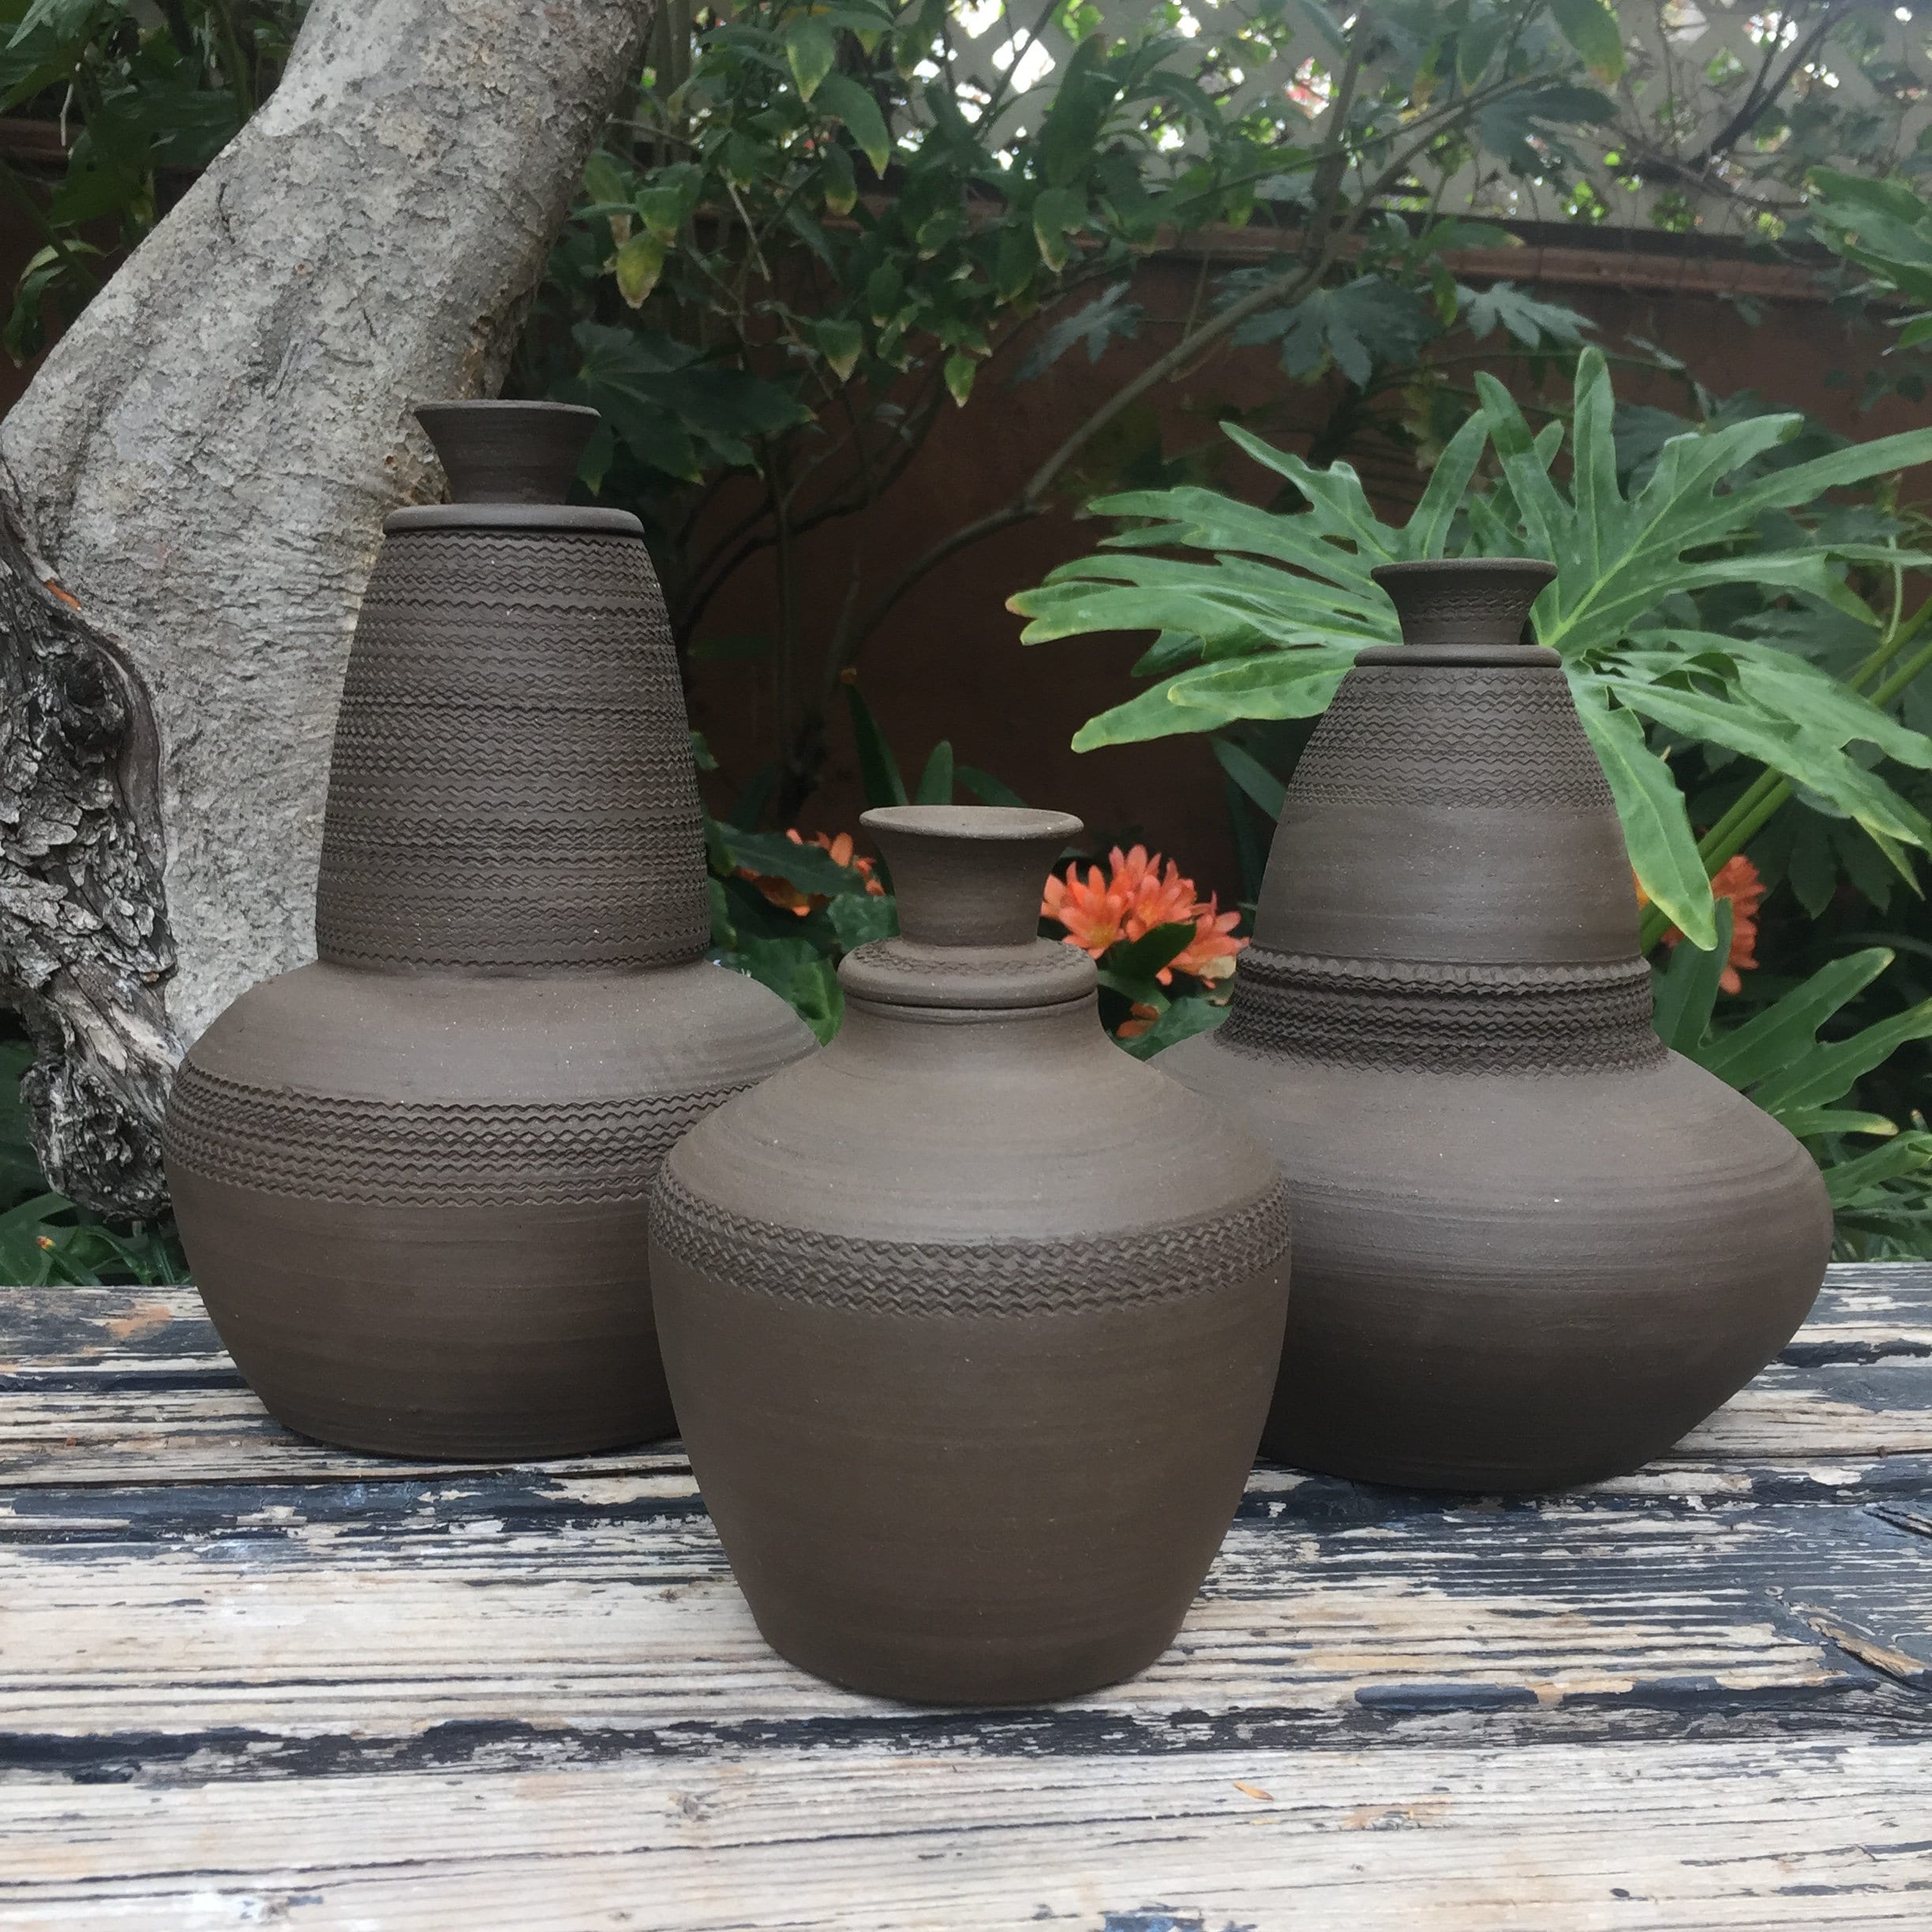 Article: Ollas - Clay Pot Irrigation Systems Plus DIY Homemade Ollas